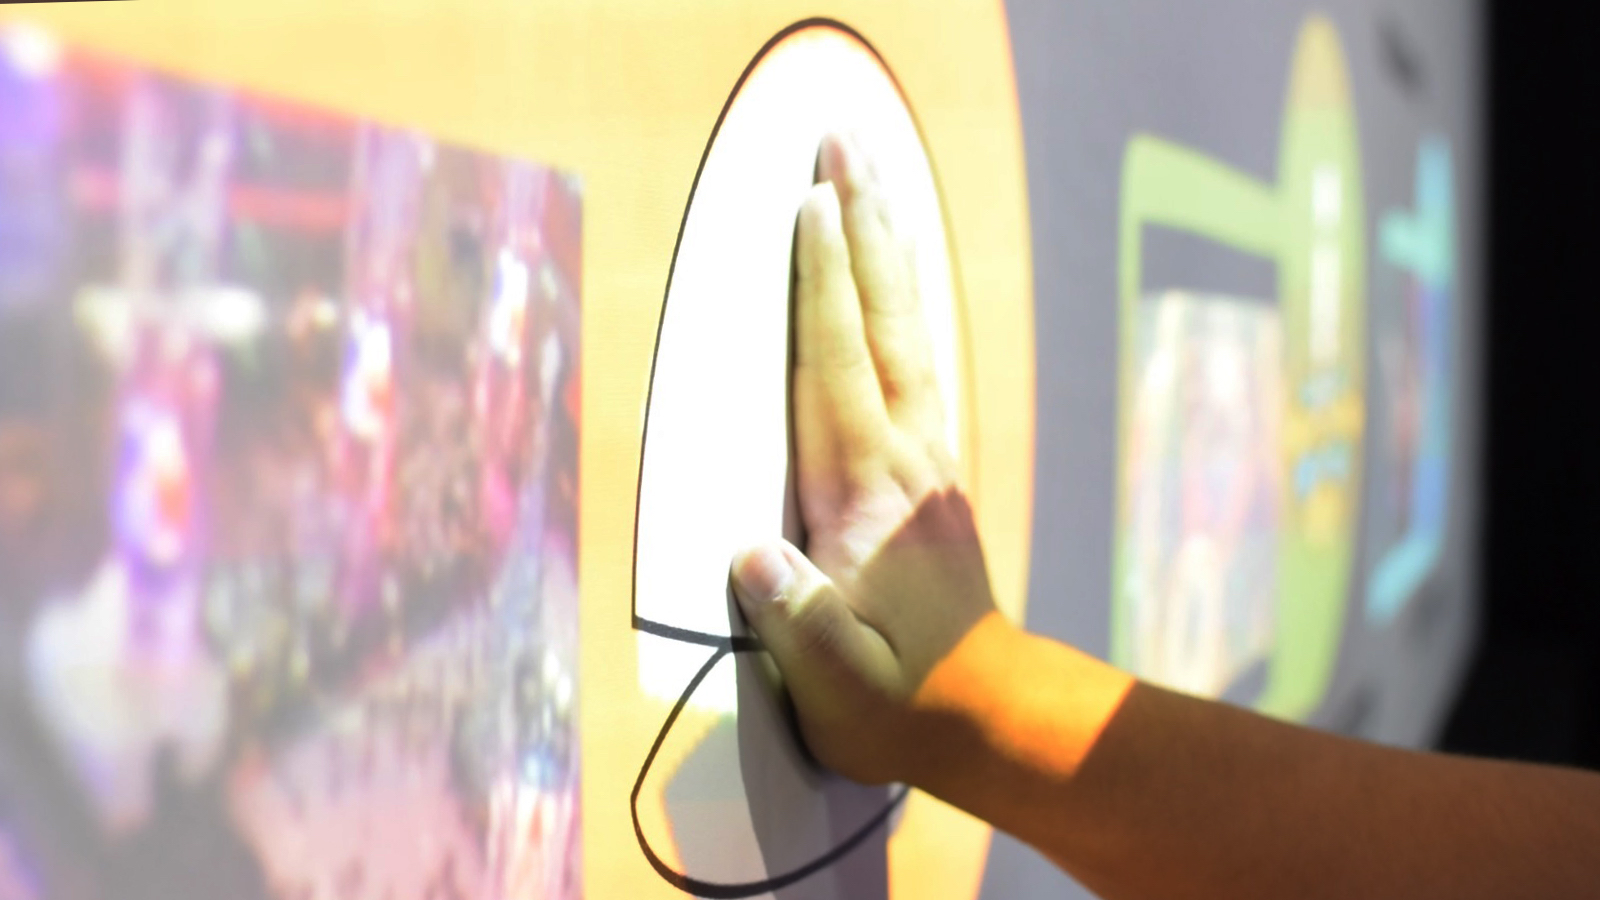 Digital Jalebi Touch Wall Projection